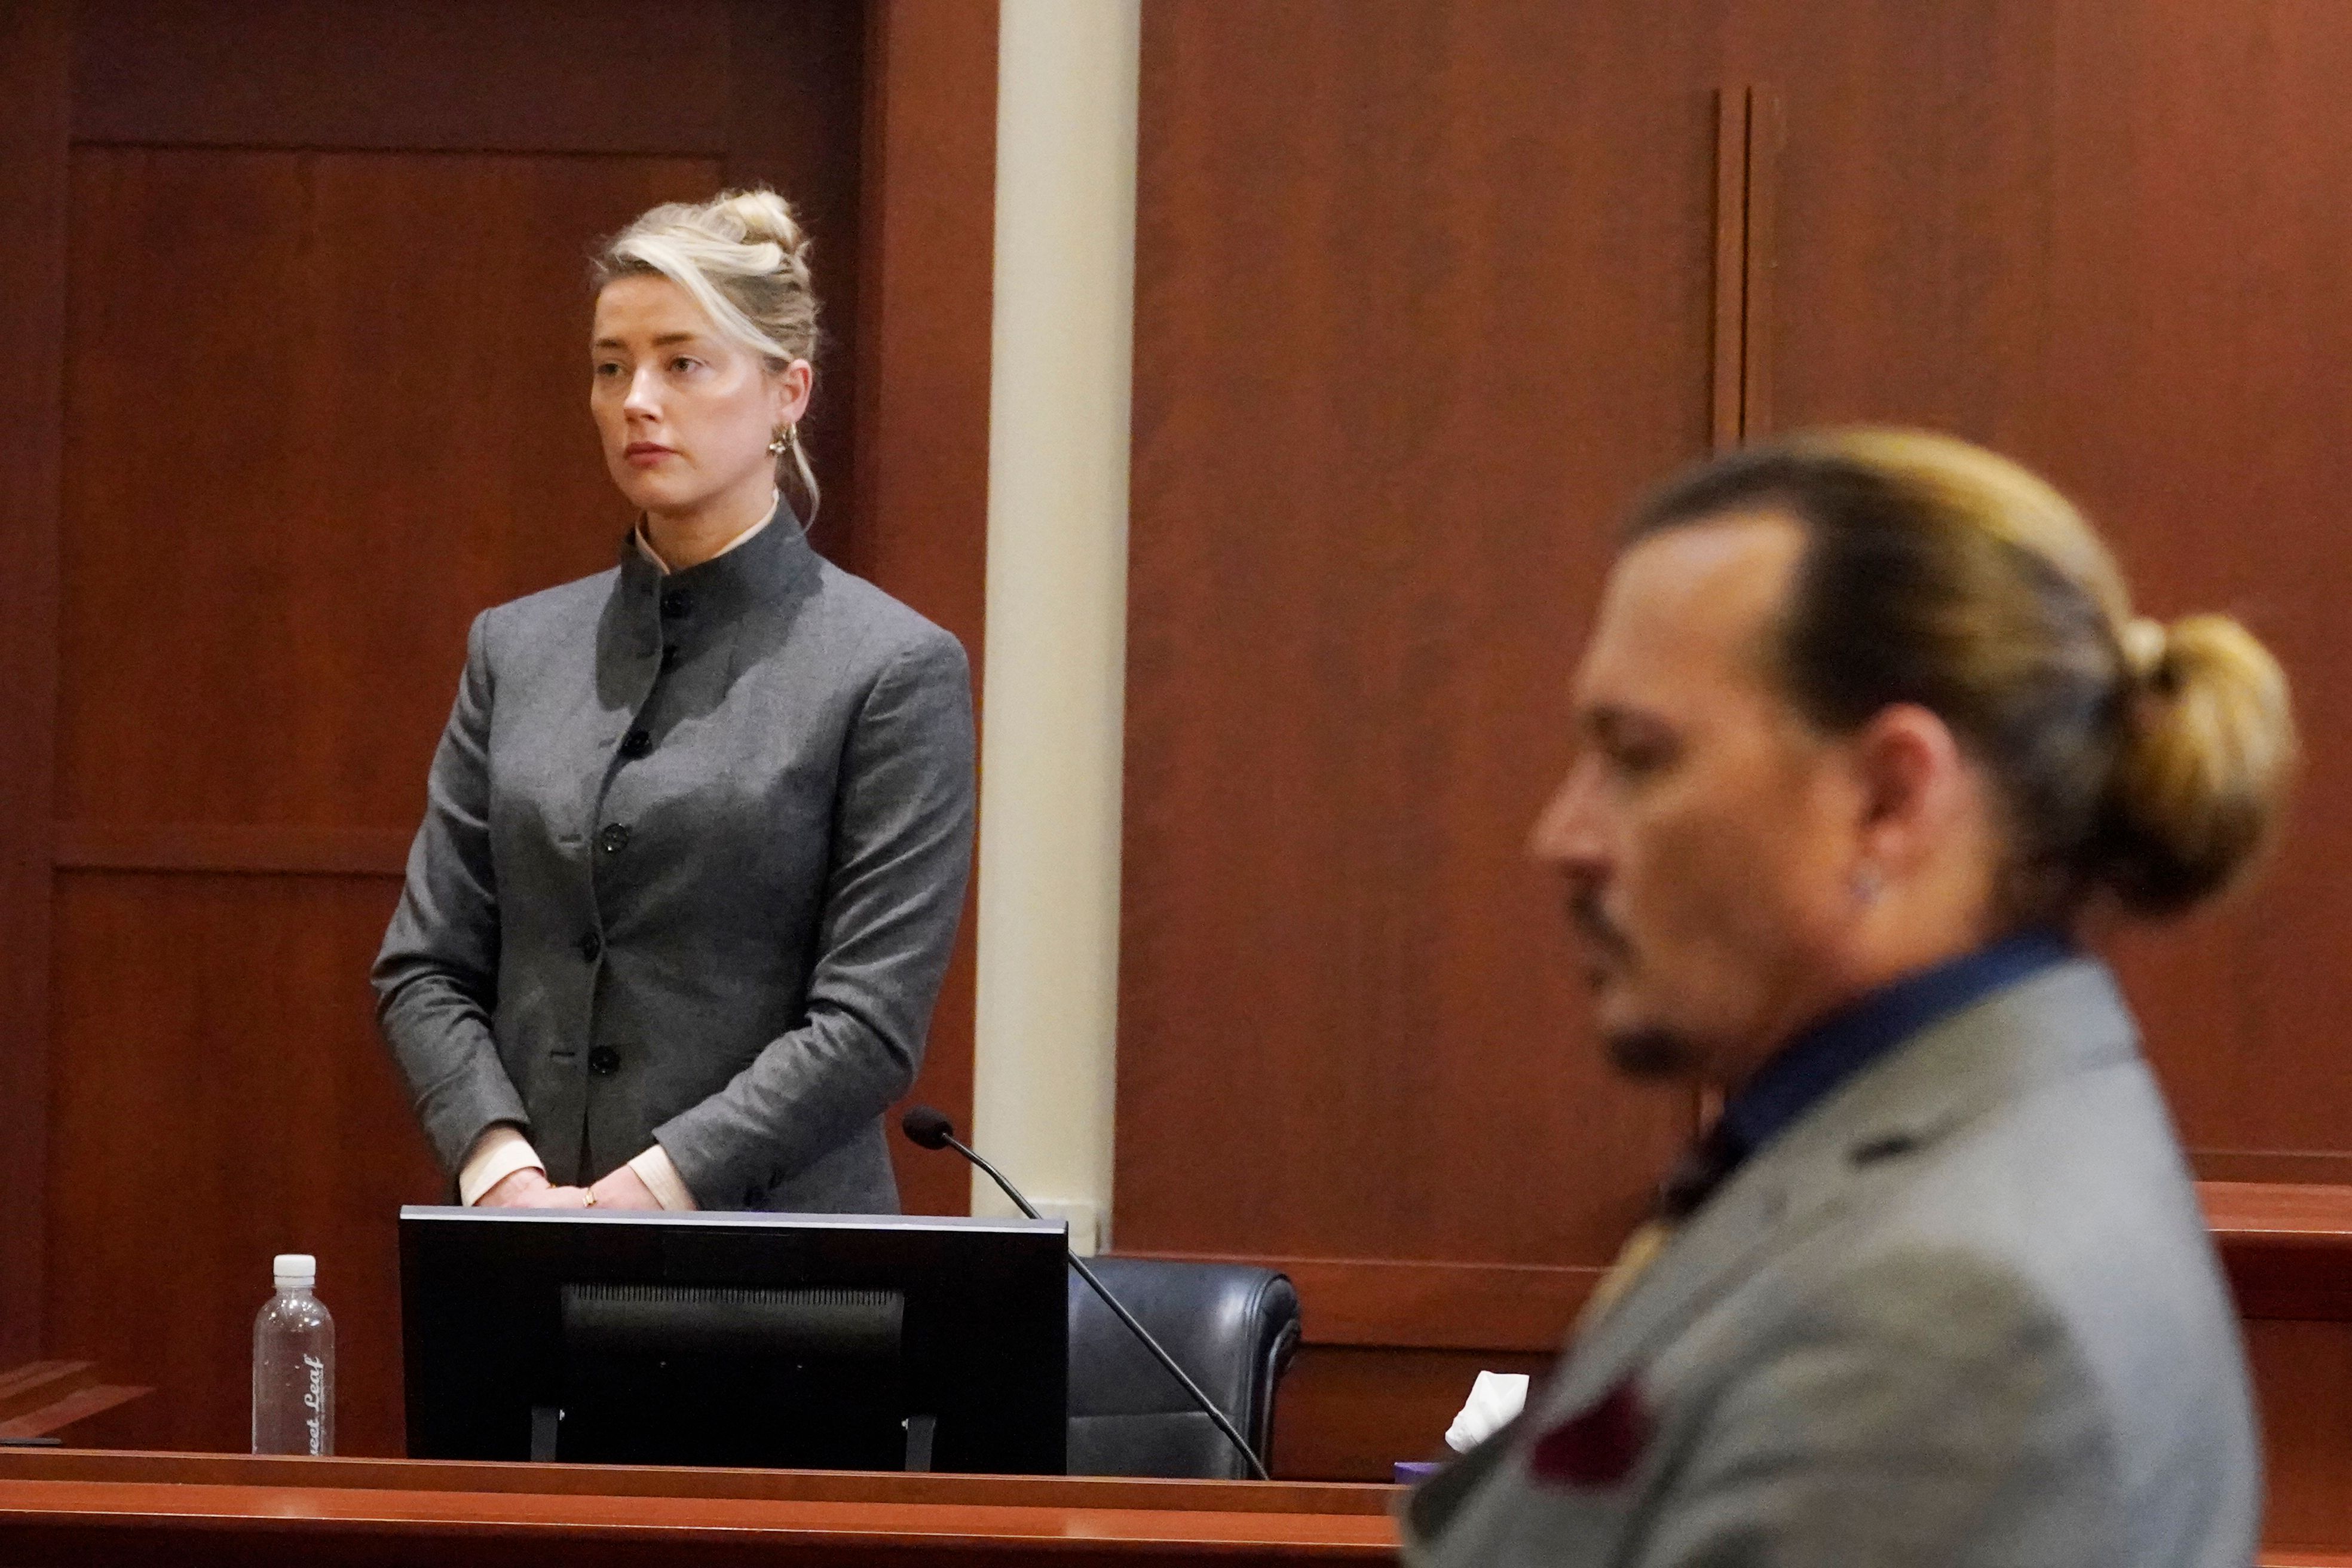 Amber Heard and Johnny Depp watch as the jury leaves the courtroom at the end of the day at the Fairfax County Circuit Courthouse in Fairfax, Virginia, May 16, 2022